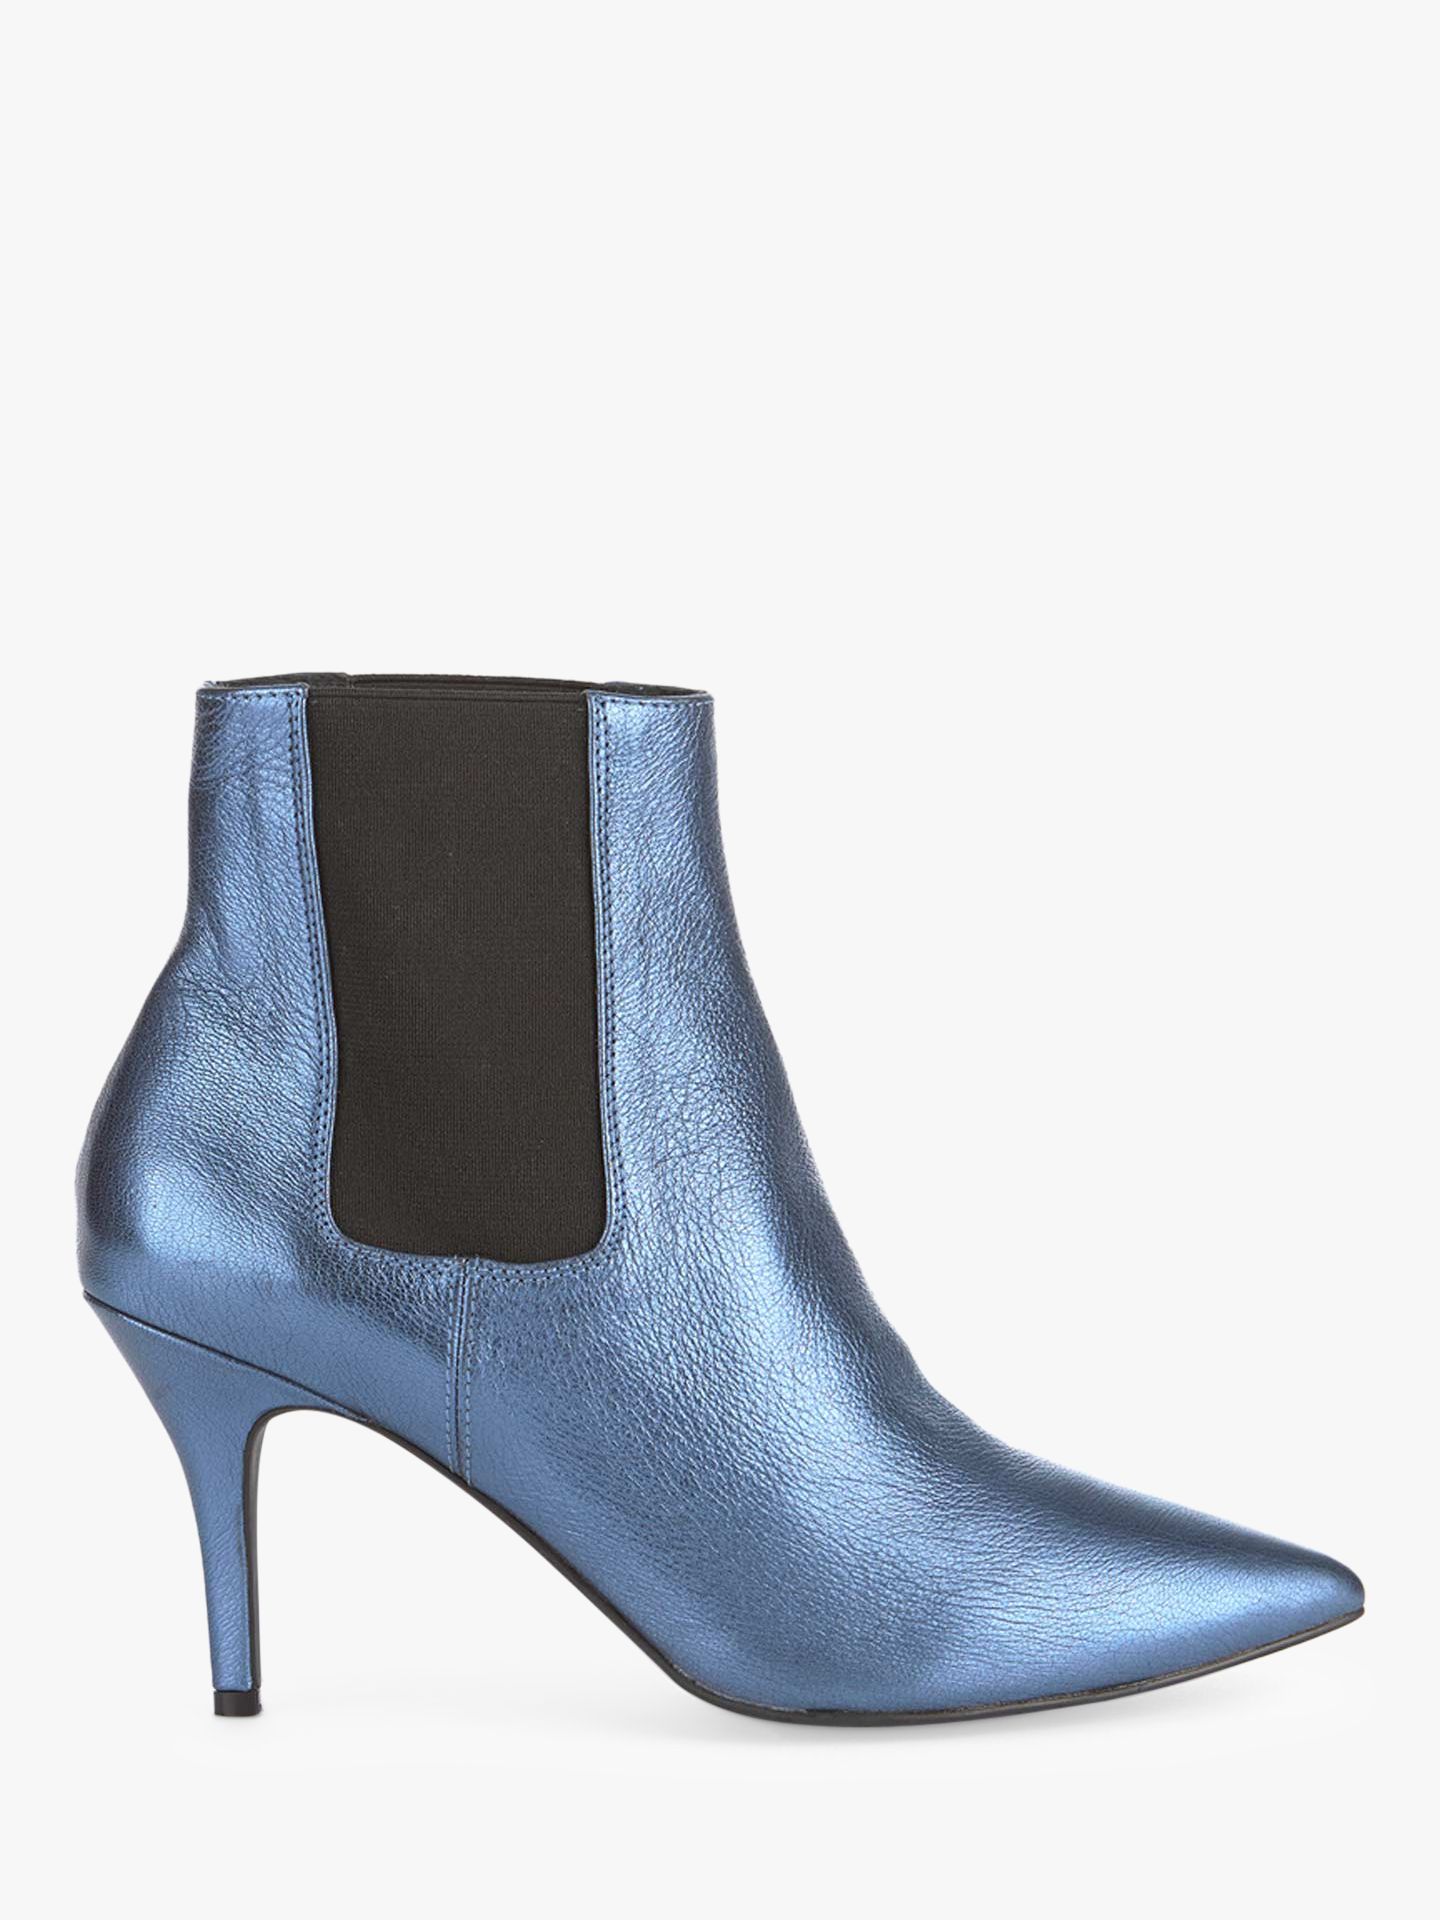 silver ankle boots zara